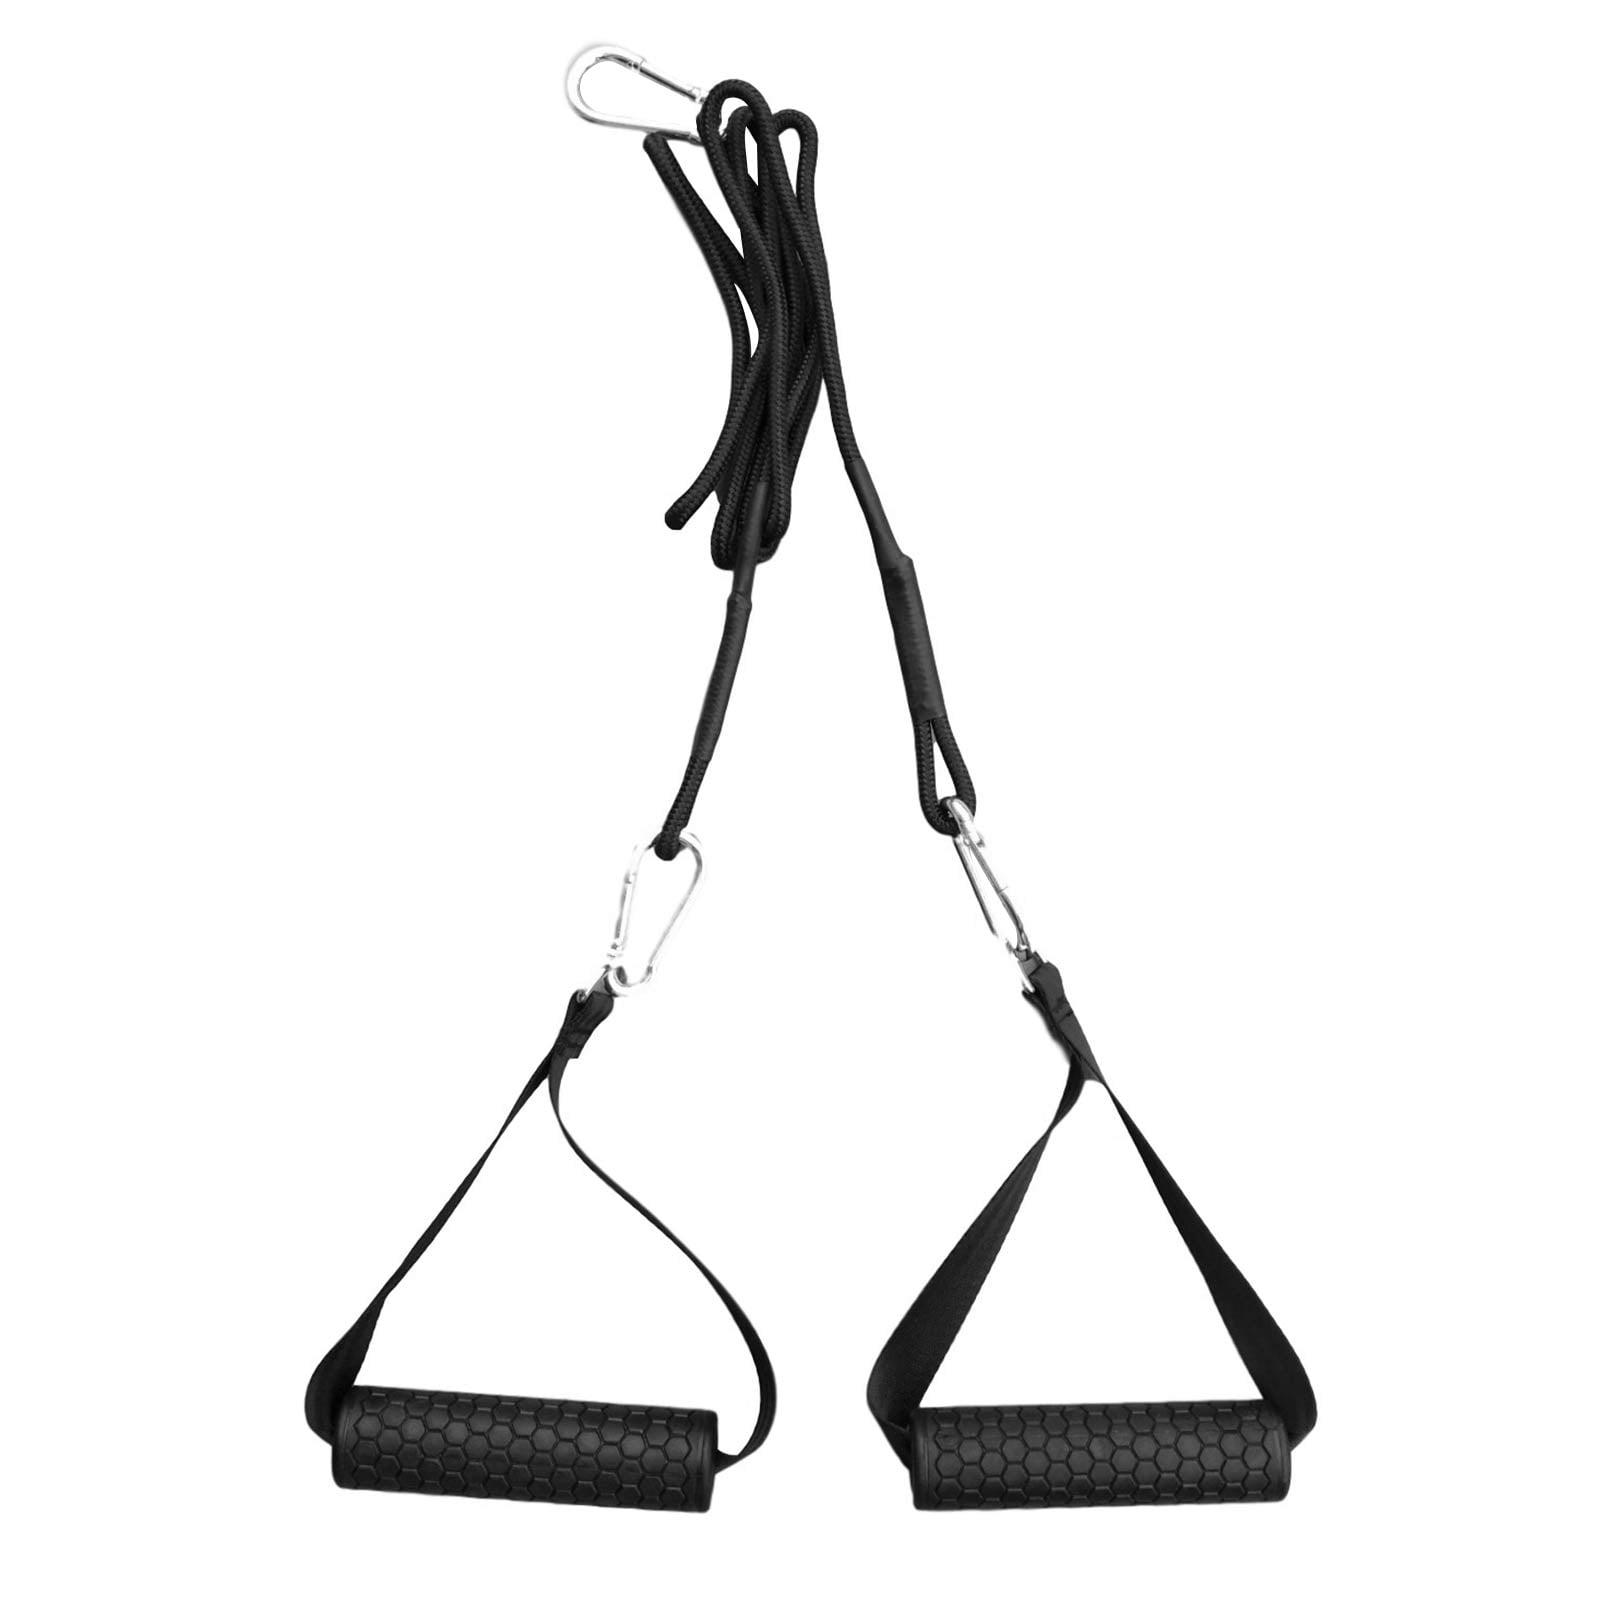 Details about   30X Heavy Duty Exercise Handles Resistance Bands Handles Grips Pull Rope Sports 